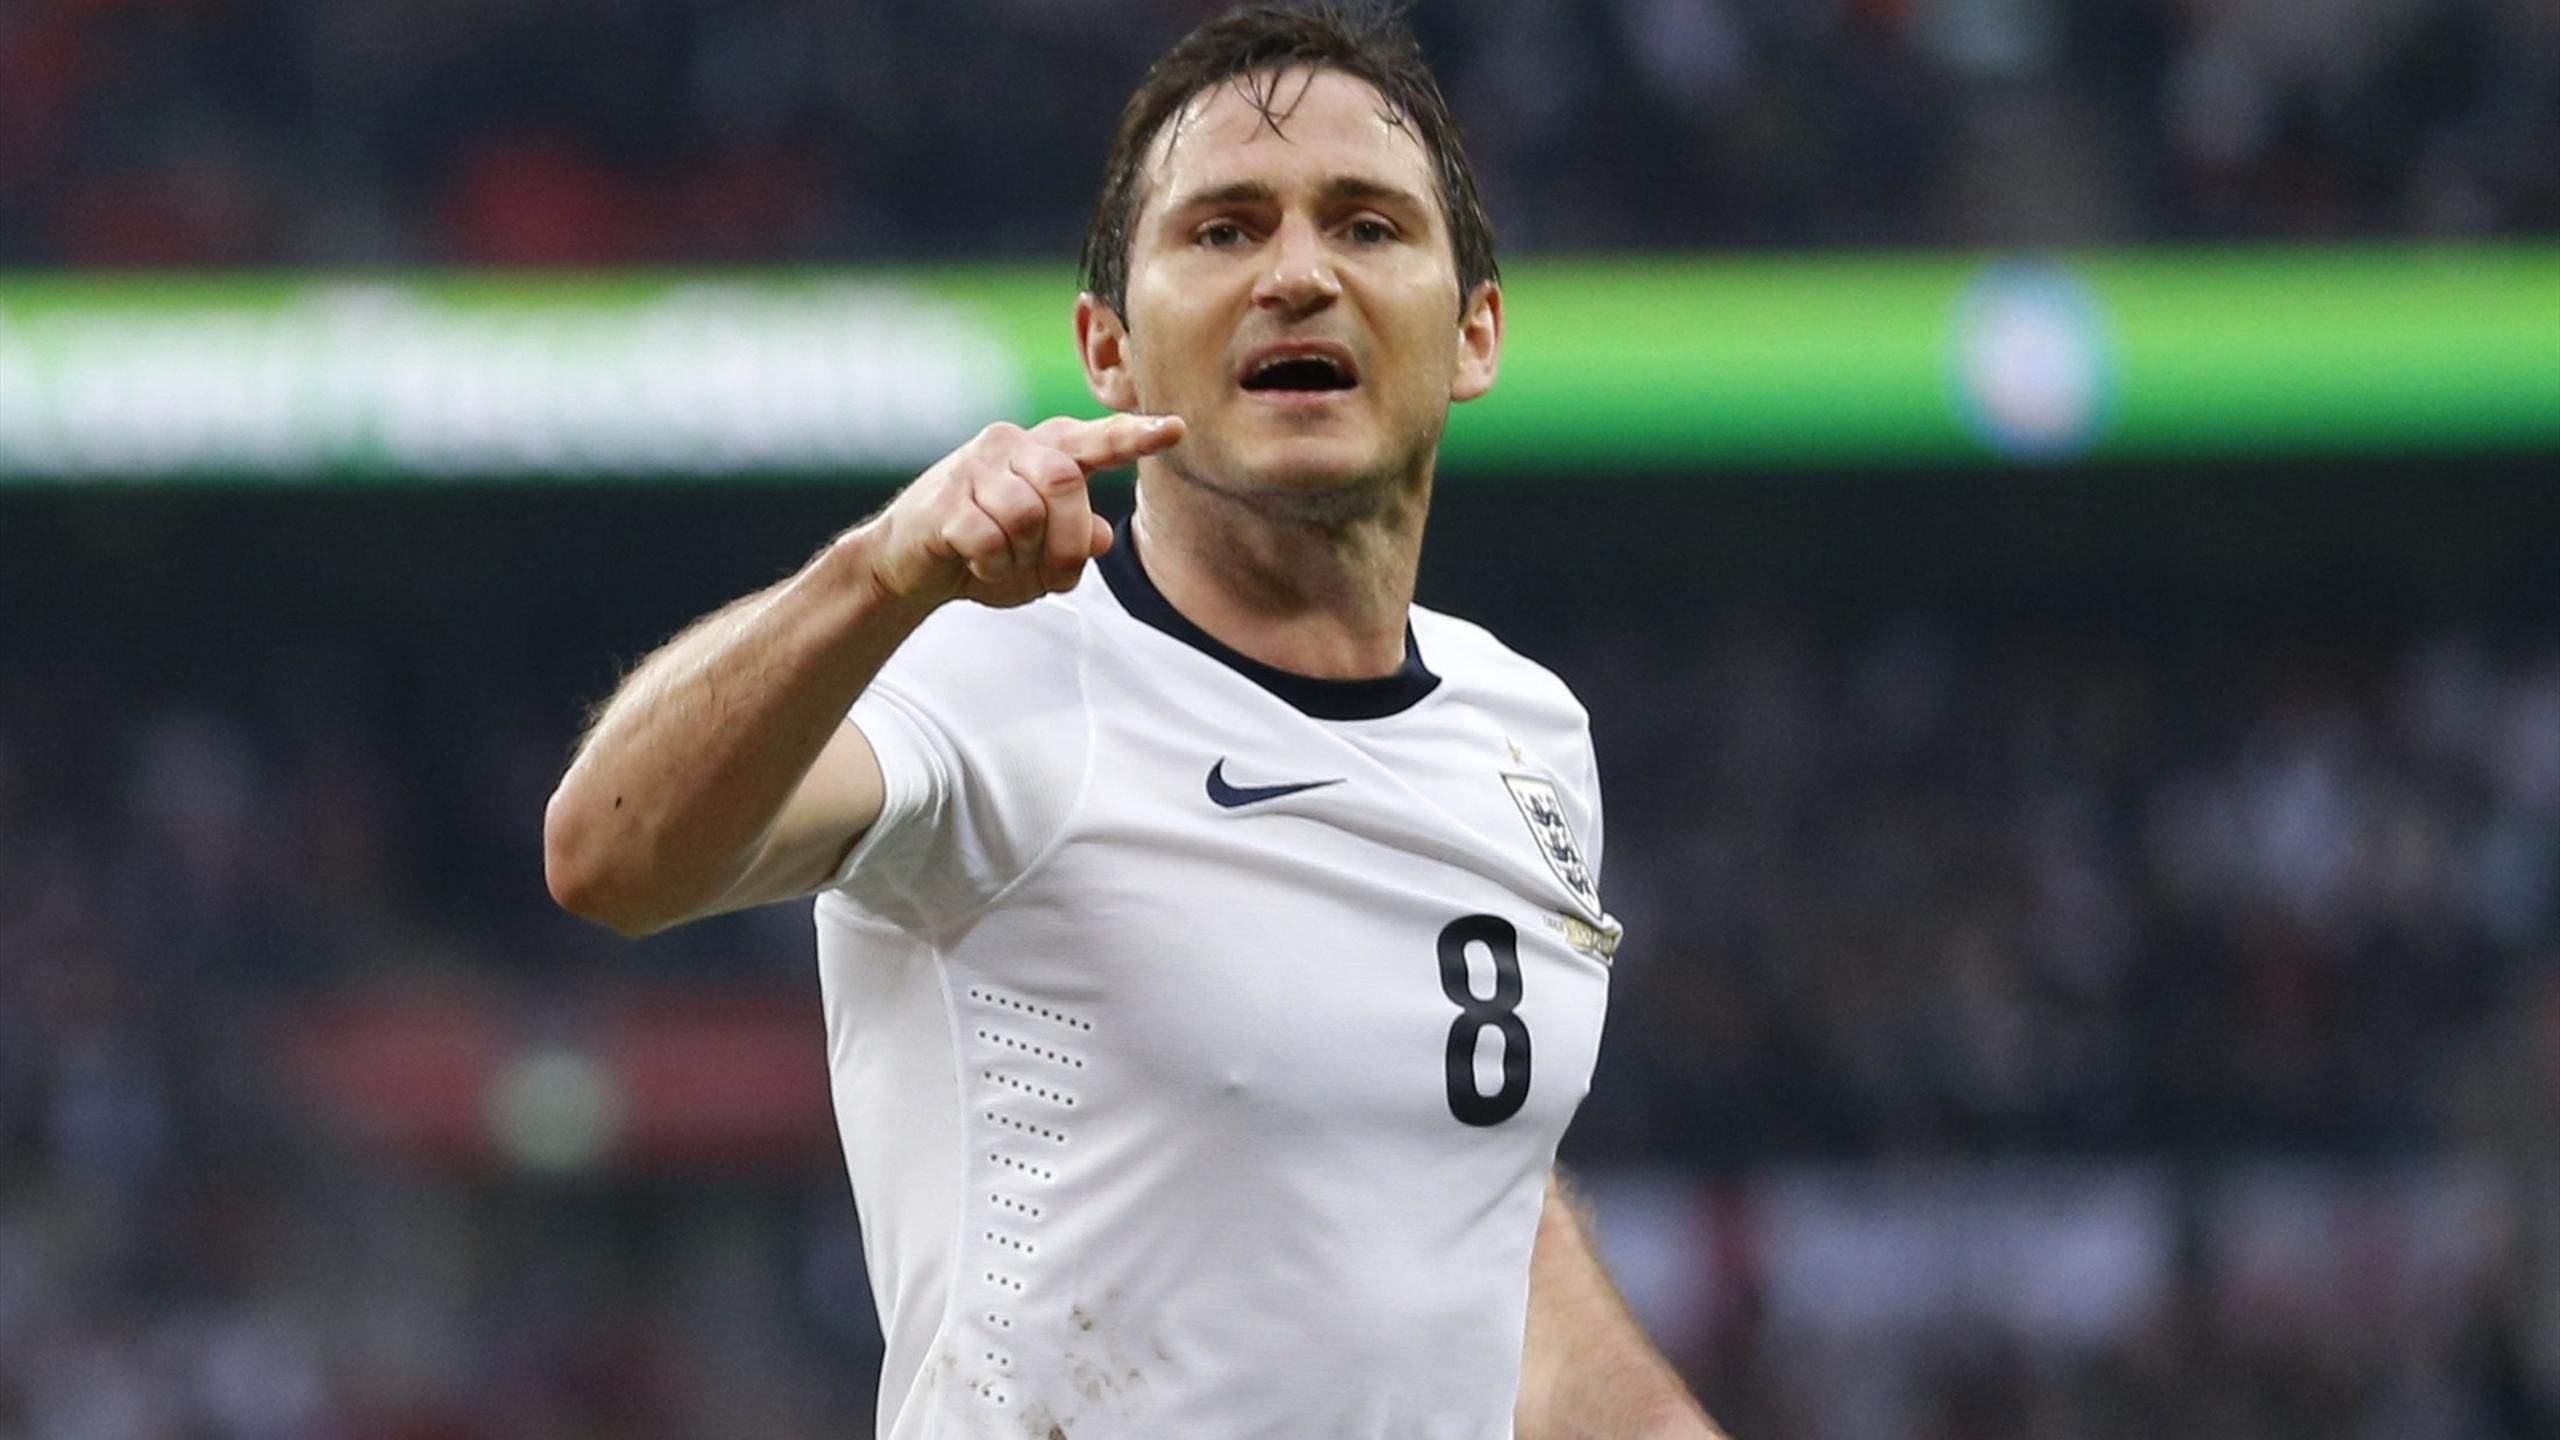 Frank Lampard's authentic England jersey